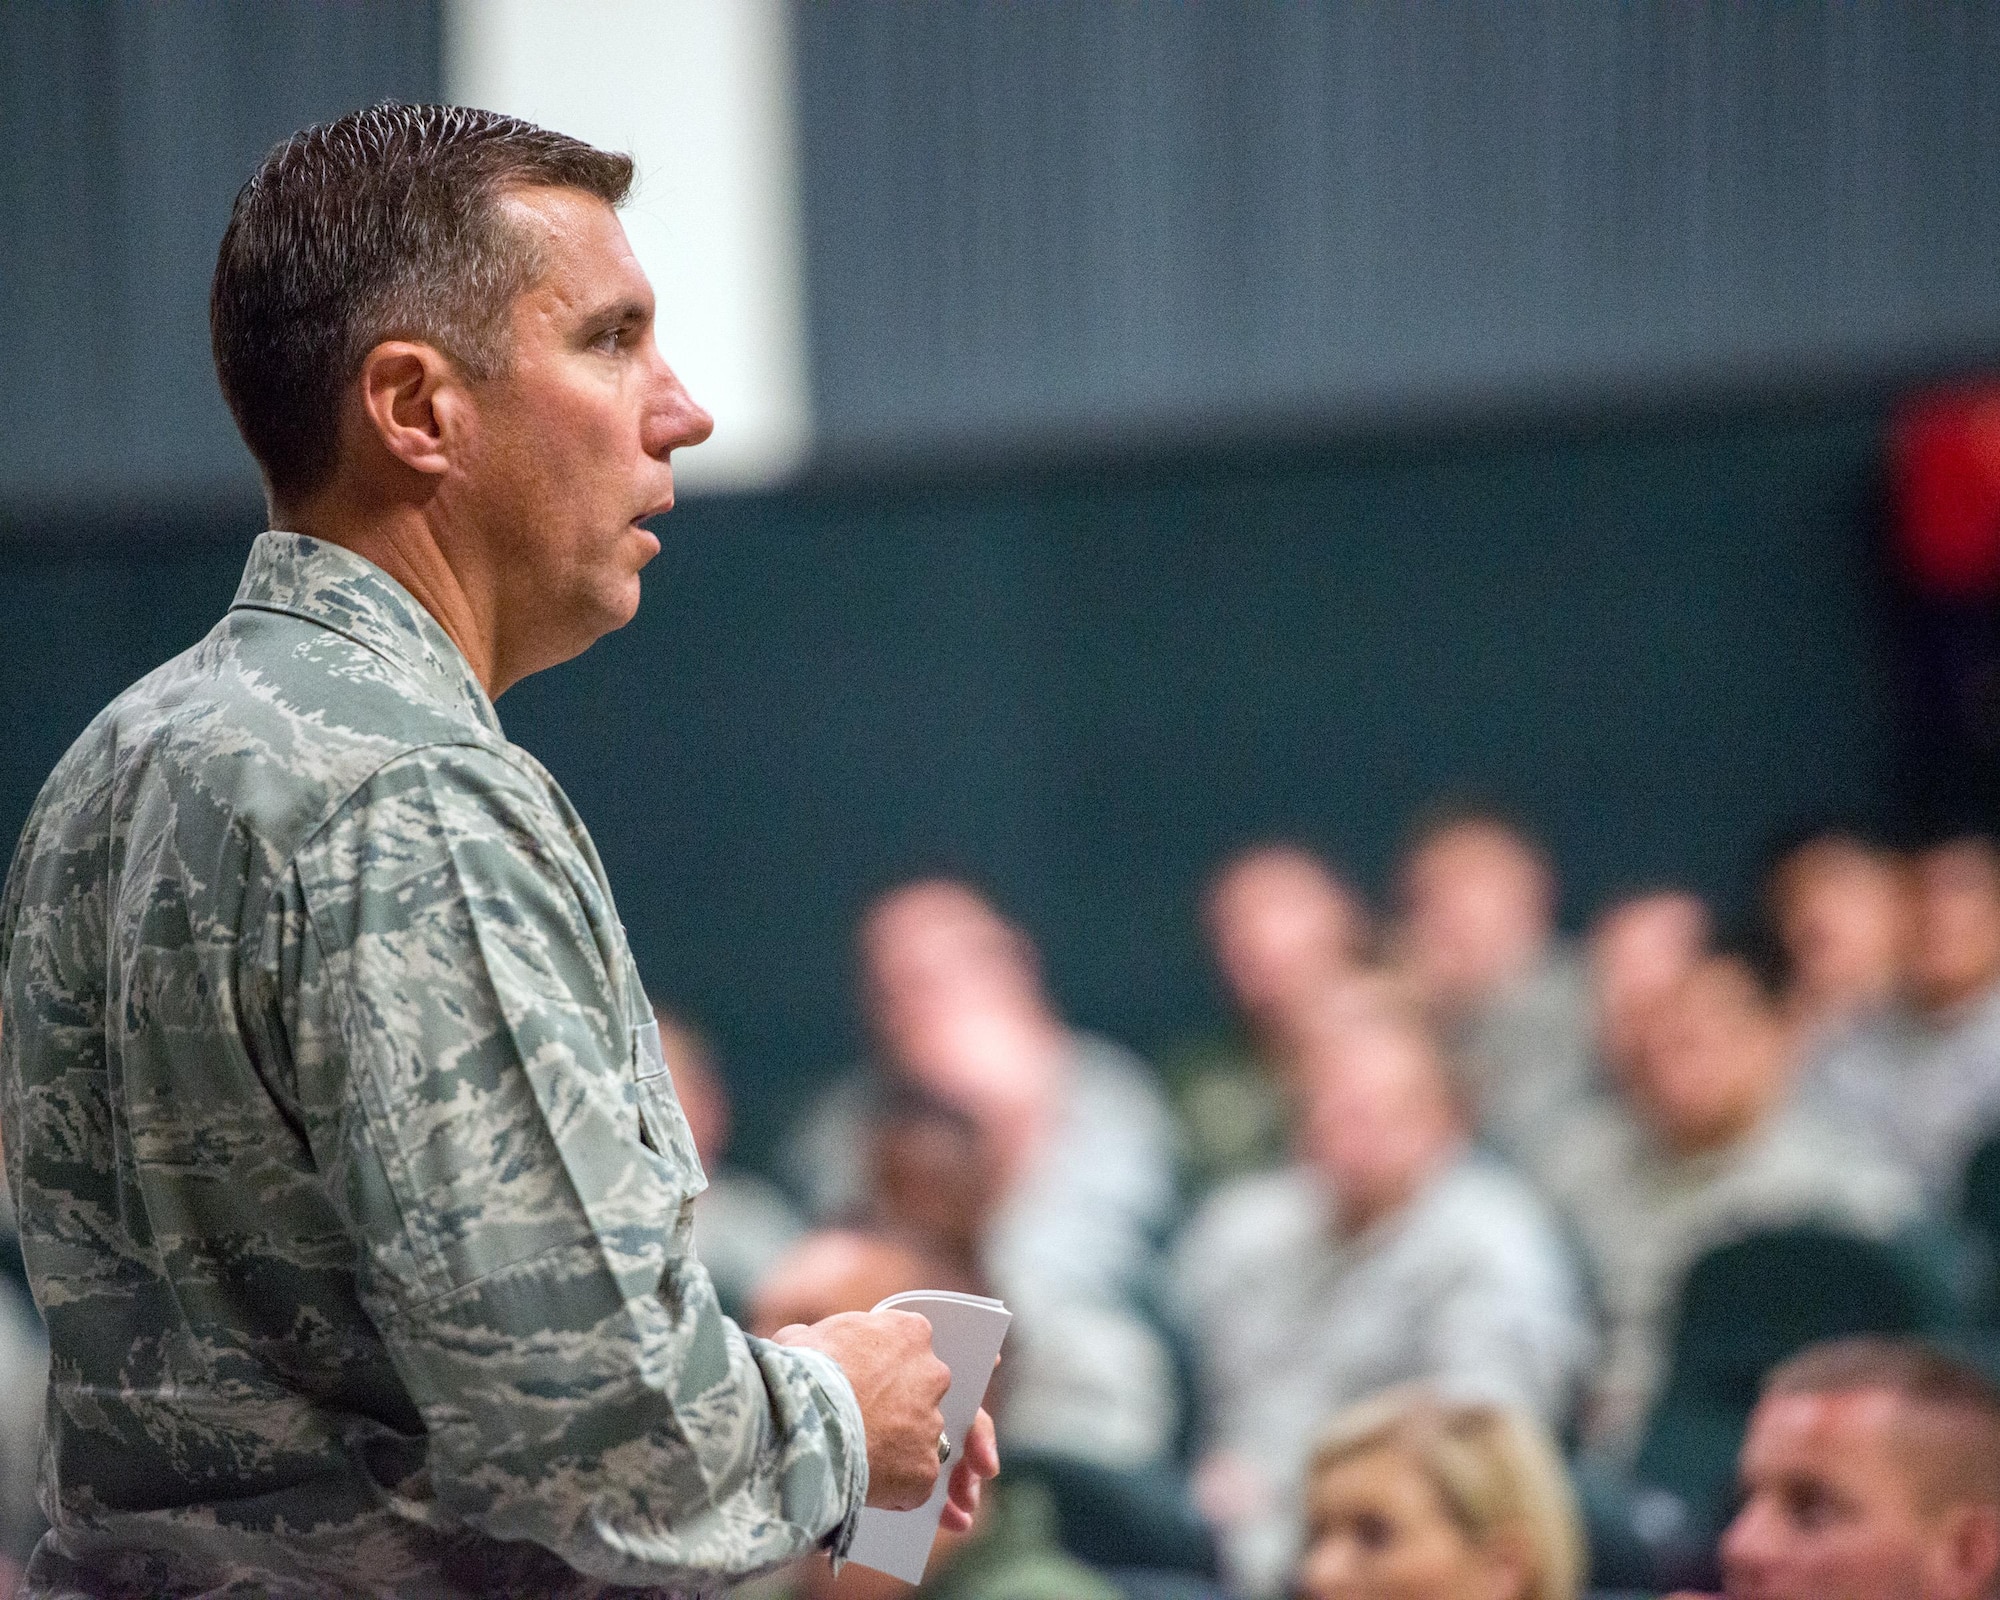 U.S. Air Force Col. John Klein, 60th Air Mobility Wing commander, gives a briefing during his commander’s call at Travis Air Force Base, Calif., August 8, 2017. Klein discussed a variety of topics to include safety, projecting American power and how every Airmen fits into the mission. (U.S. Air Force photo by Louis Briscese)